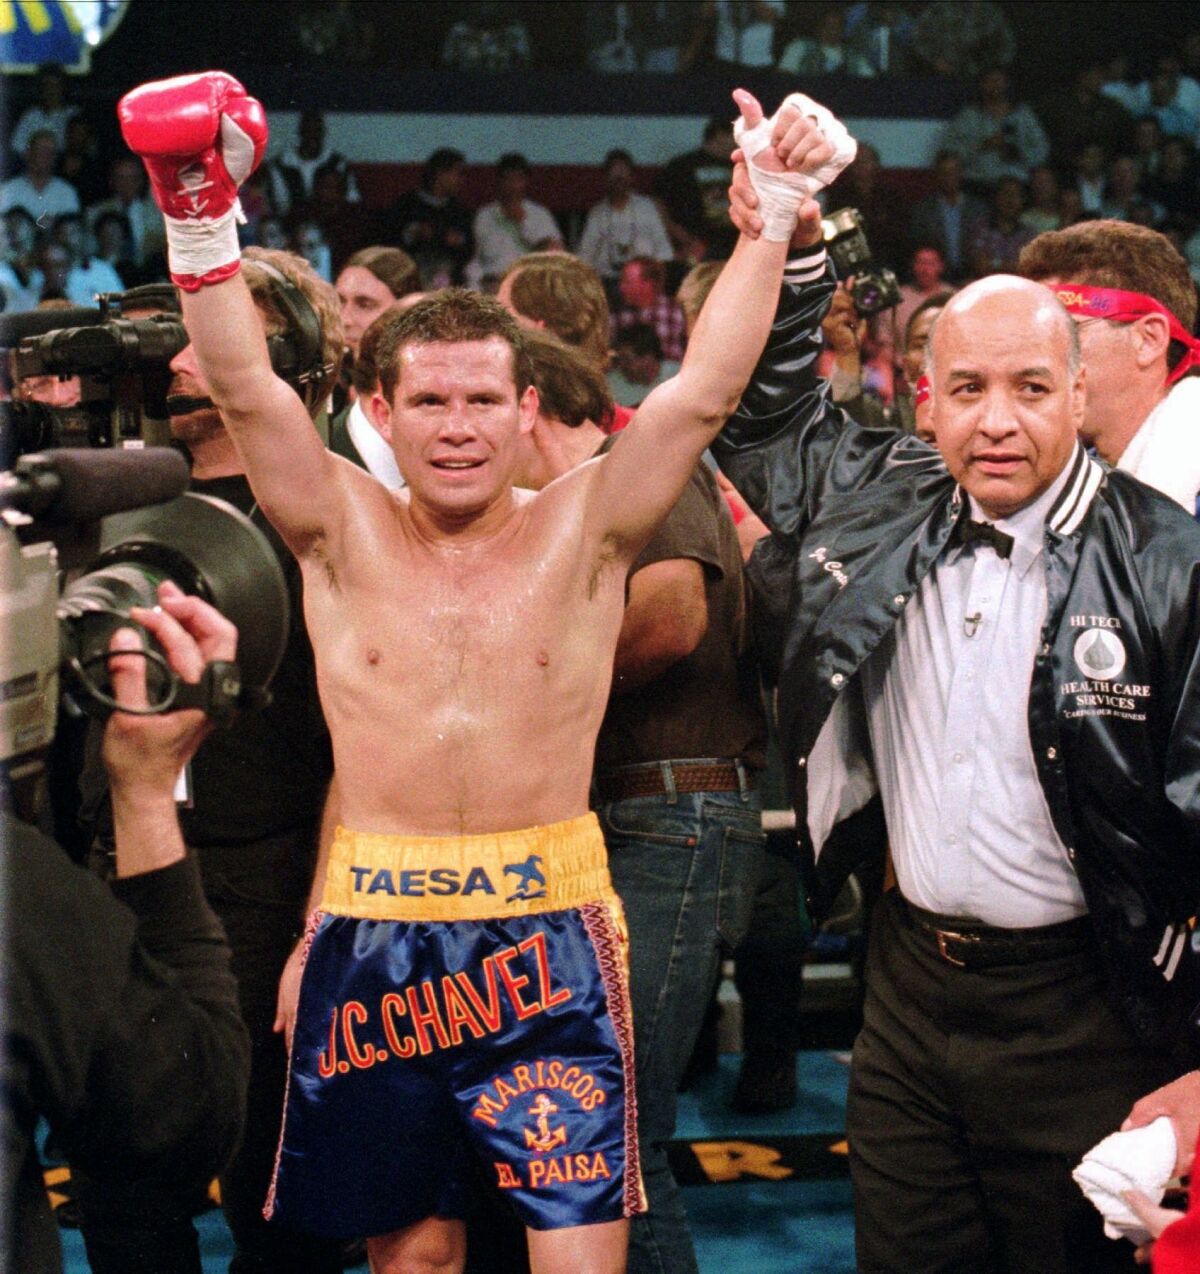 This Feb. 9, 1996, file photo shows WBC junior welterweight champion Julio Cesar Chavez, left, celebrating his victory over Scott Walker as referee Joe Cortez signals him the winner of their 10-round non-title bout in Las Vegas. Chavez and referee Cortez were selected Tuesday, Dec. 10, 2010, for induction into the International Boxing Hall of Fame and Museum.